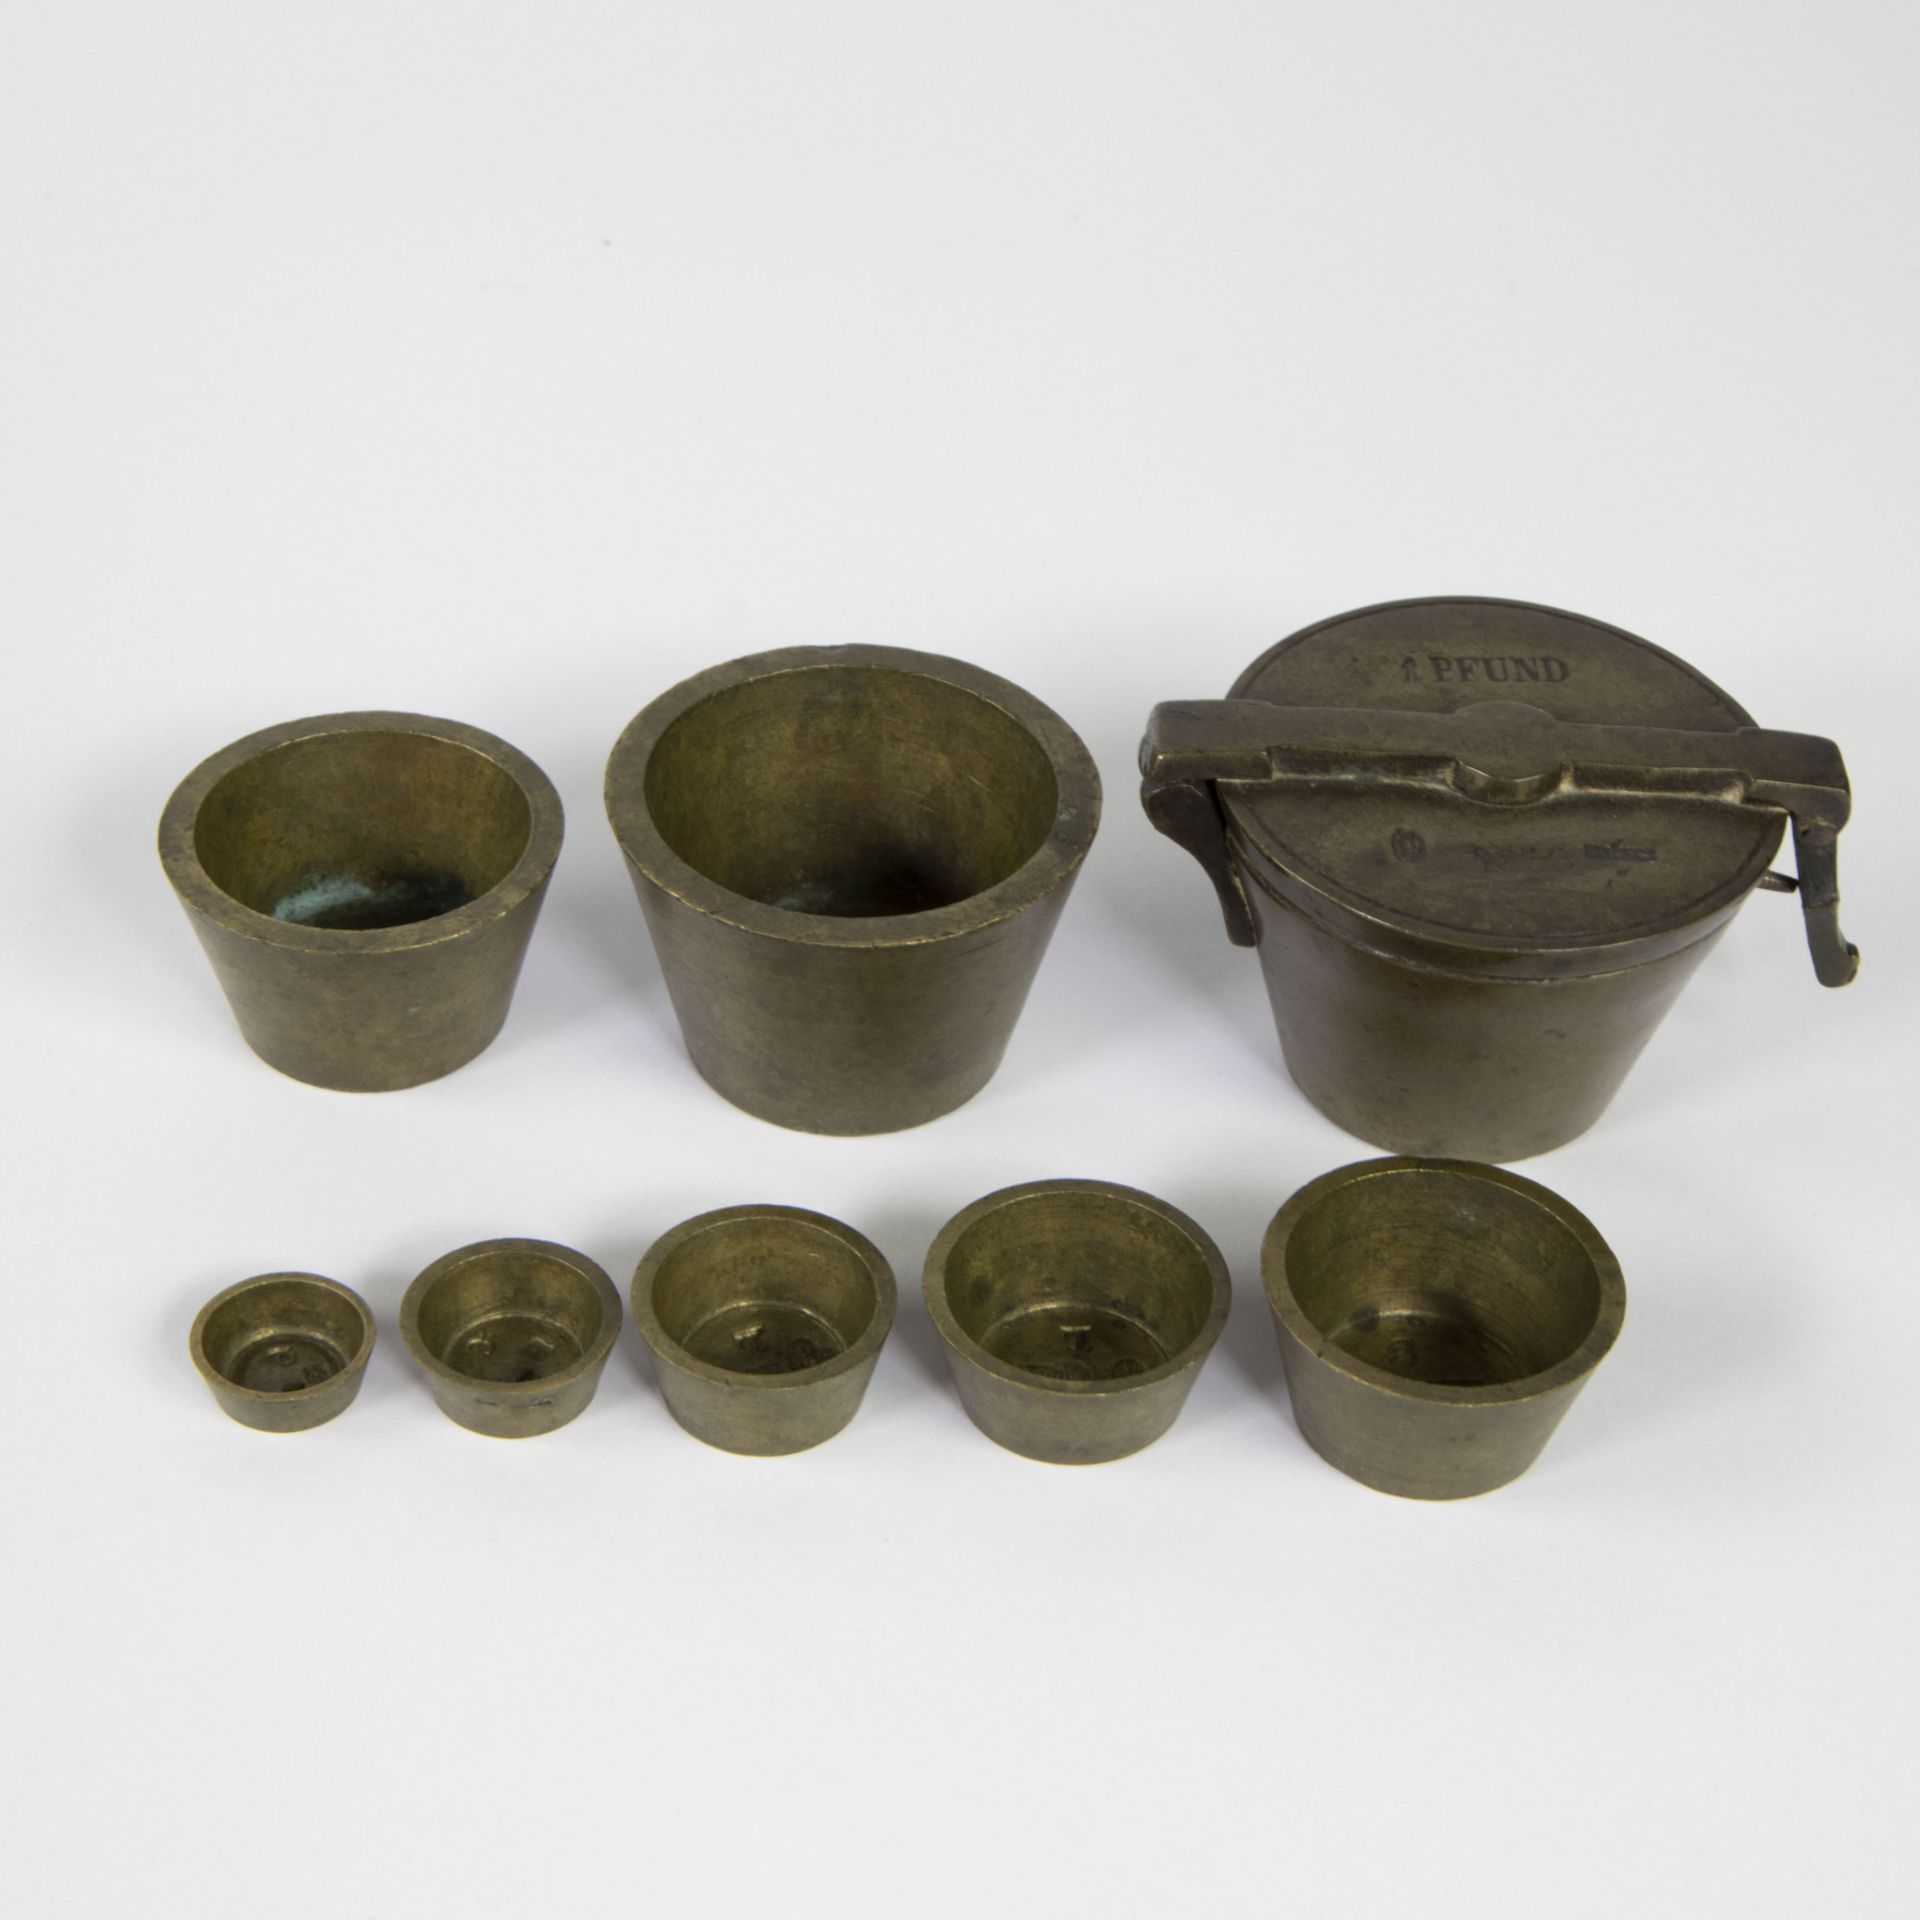 Lot of 4 bronze mortars with 2 pestle and 2 8-piece closing weights German 1836 and 1704 (marked) - Bild 8 aus 8